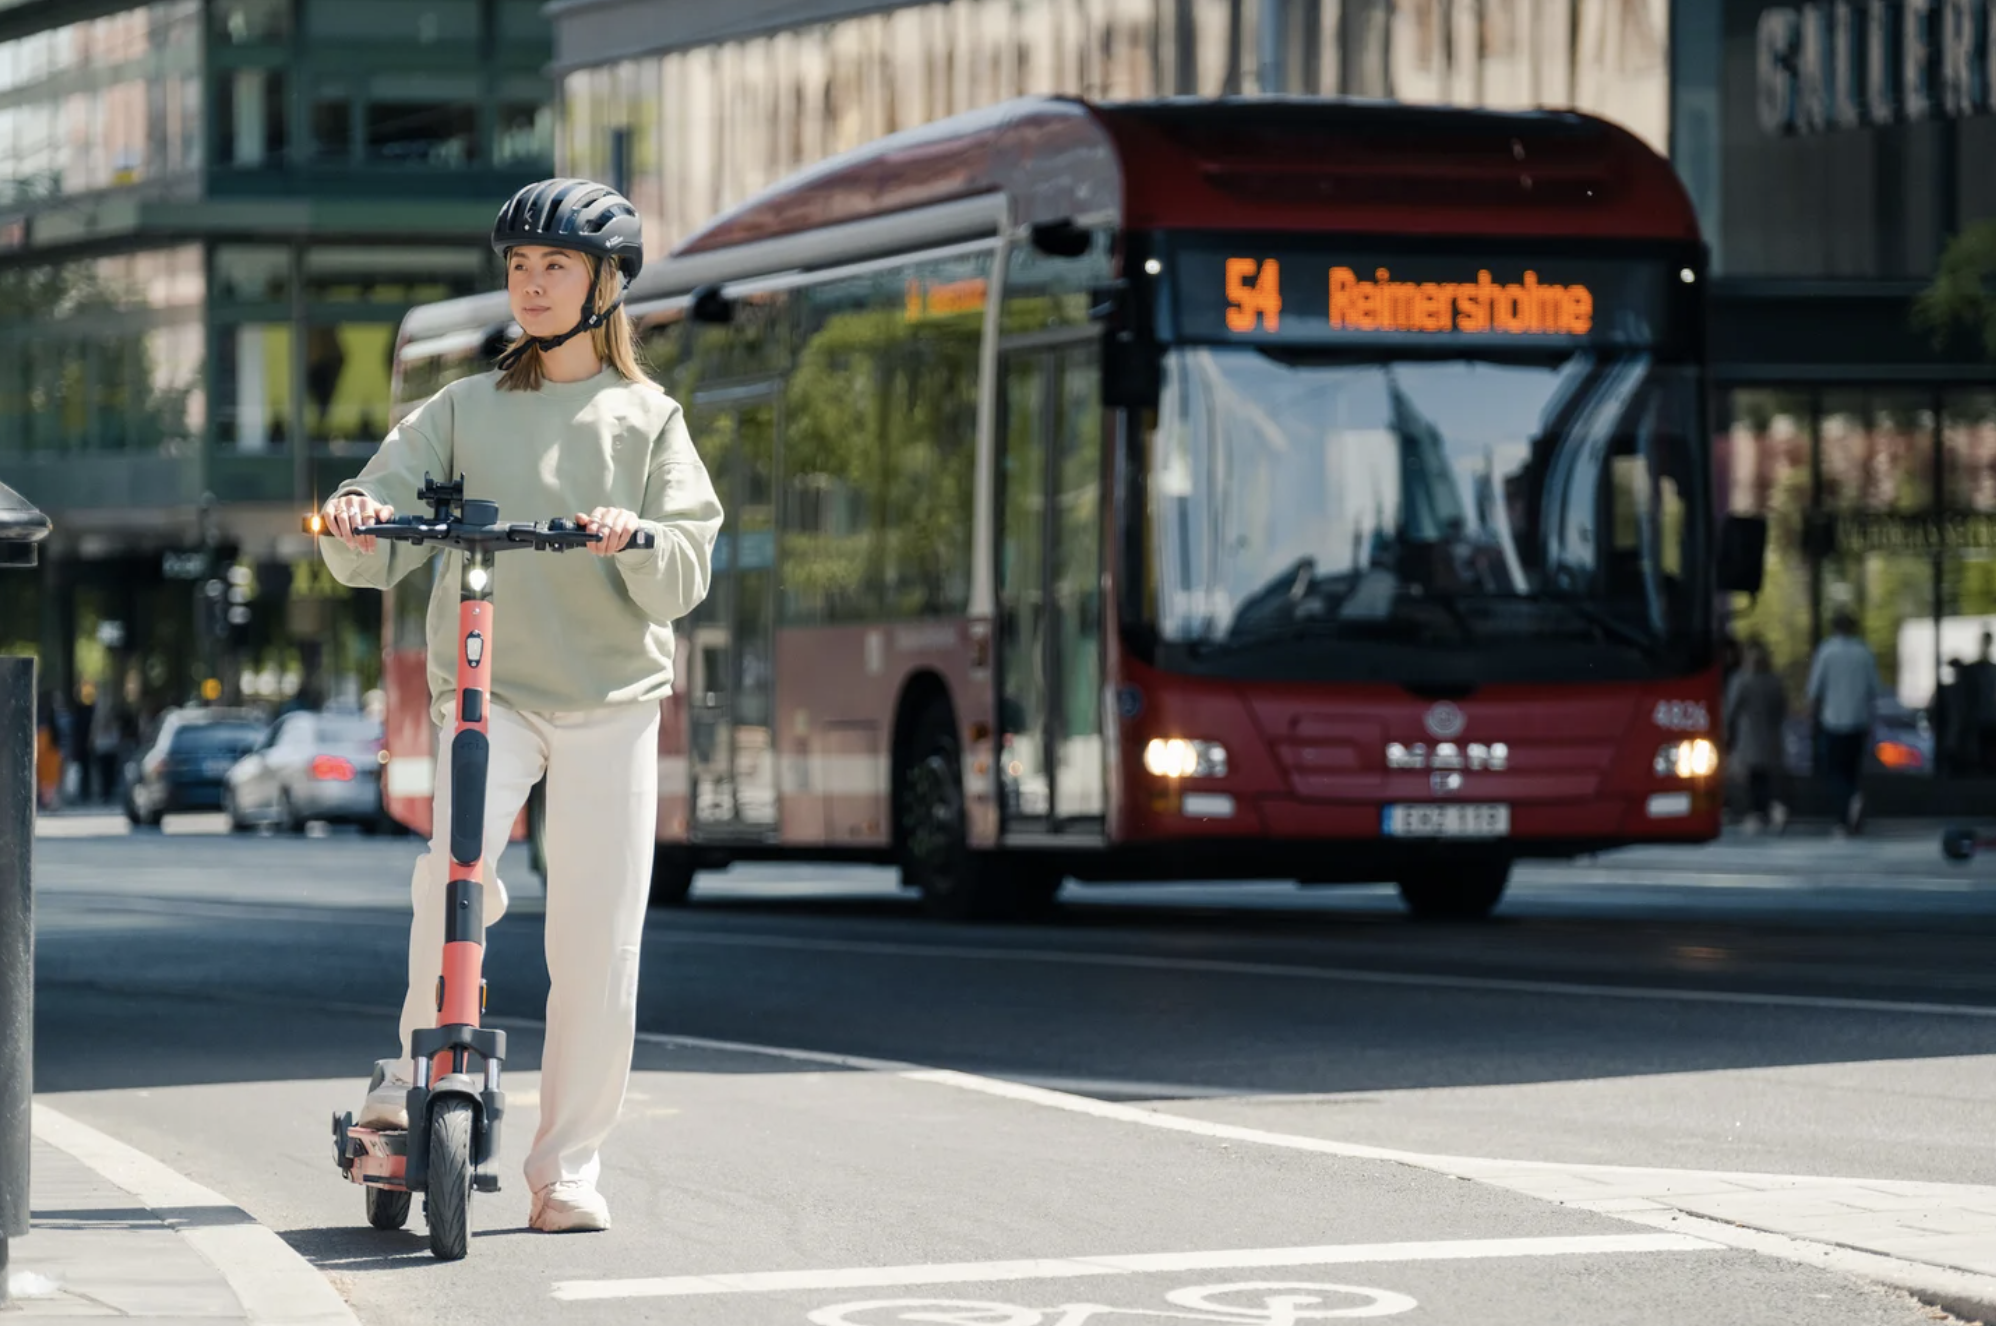 Voi and Flare aim to transform safety standards within the micromobility sector and help pave the way for a future of secure and sustainable urban transportation